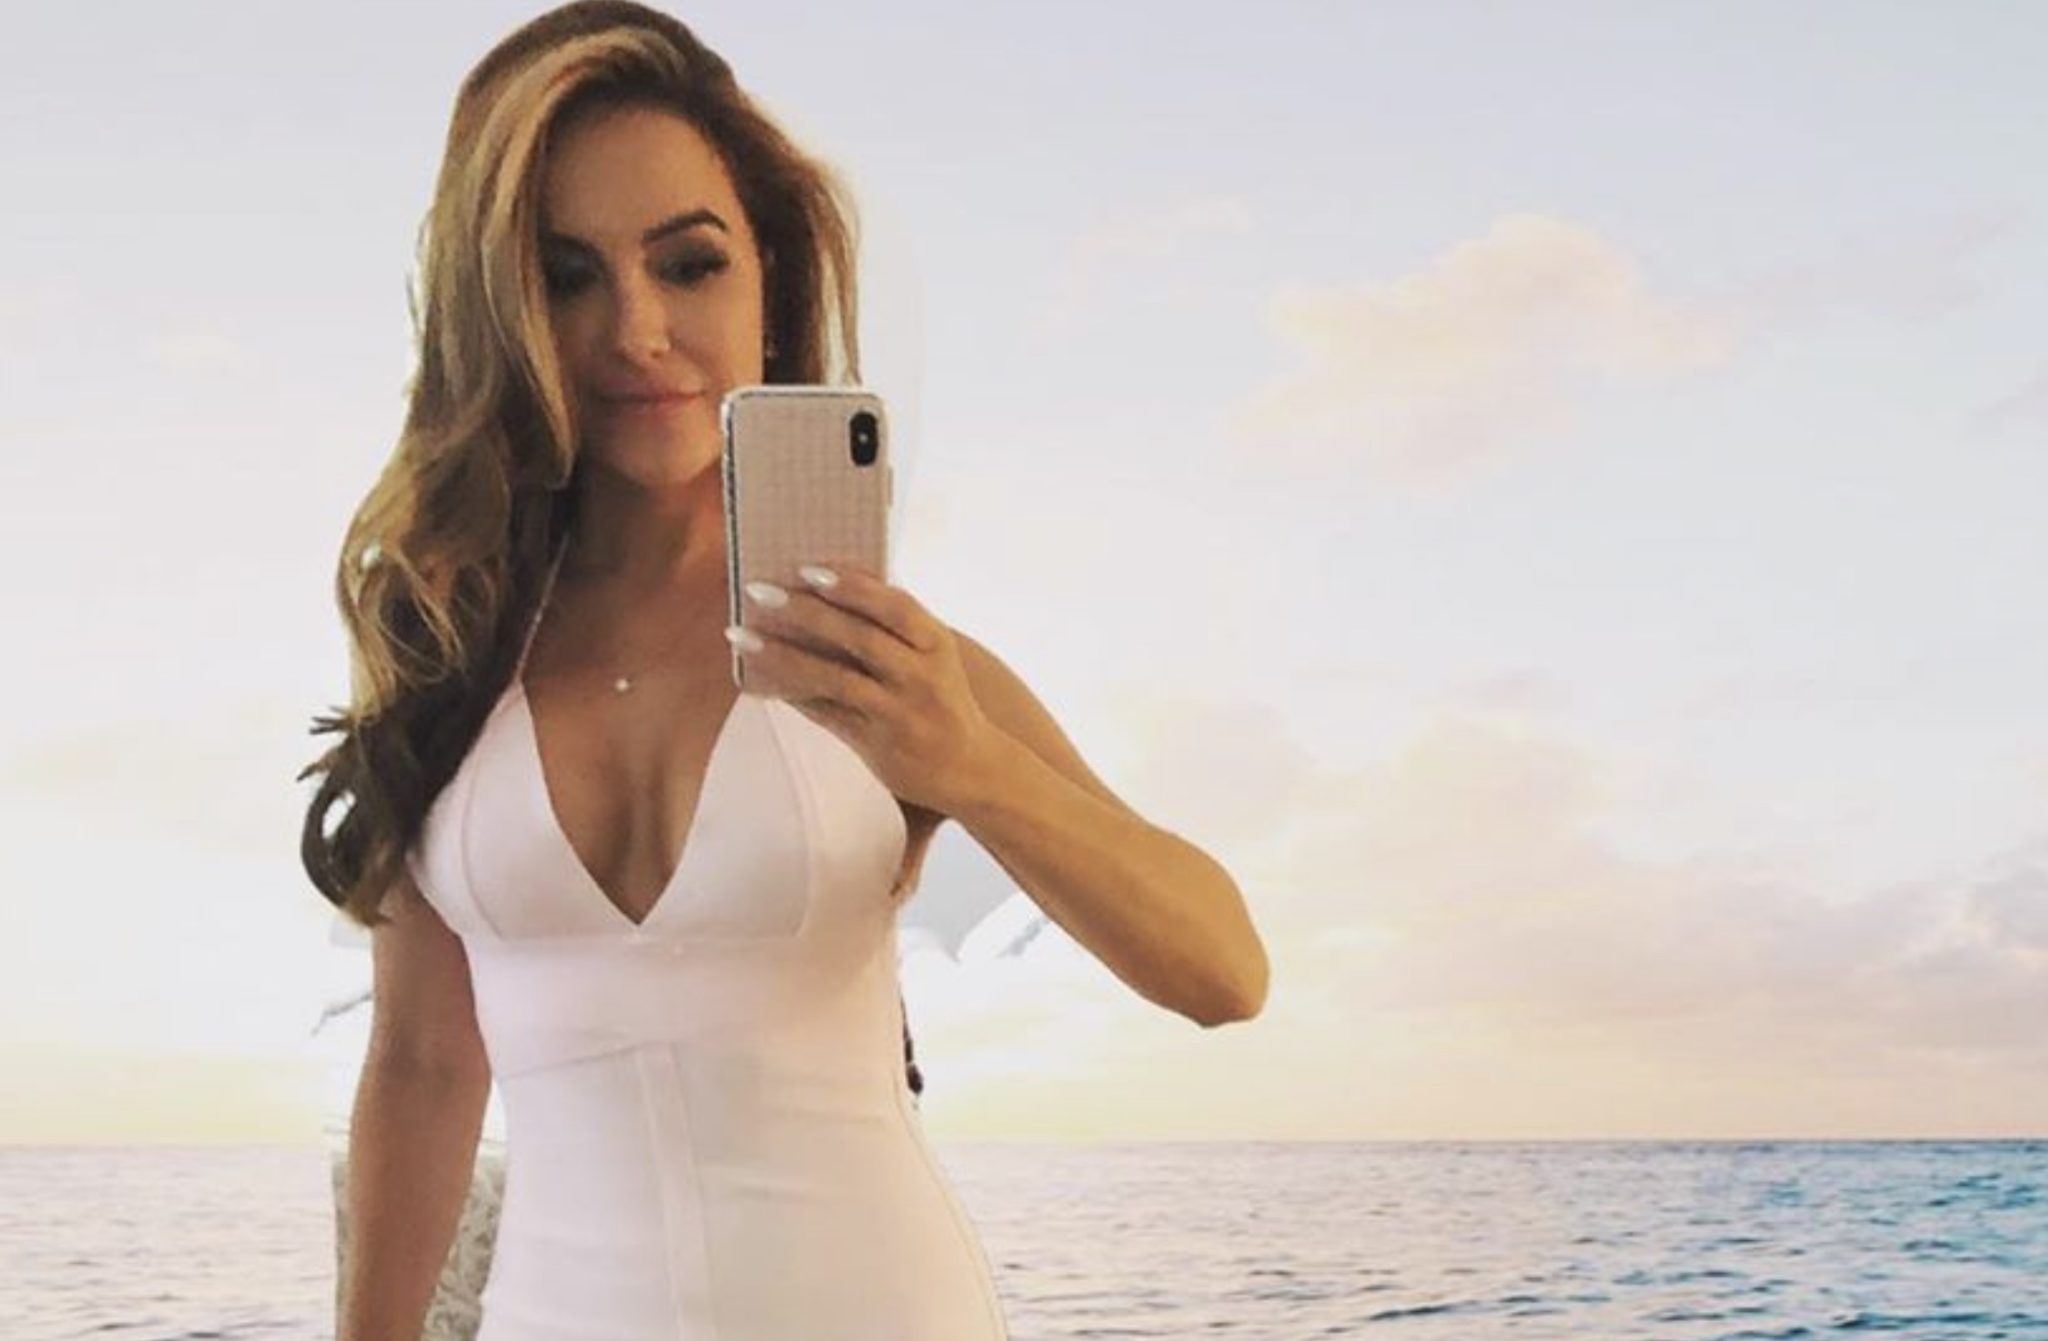 Chrishell Stause moving on from Justin Hartley-https://www.instagram.com/p/B0hkeifnjcl/